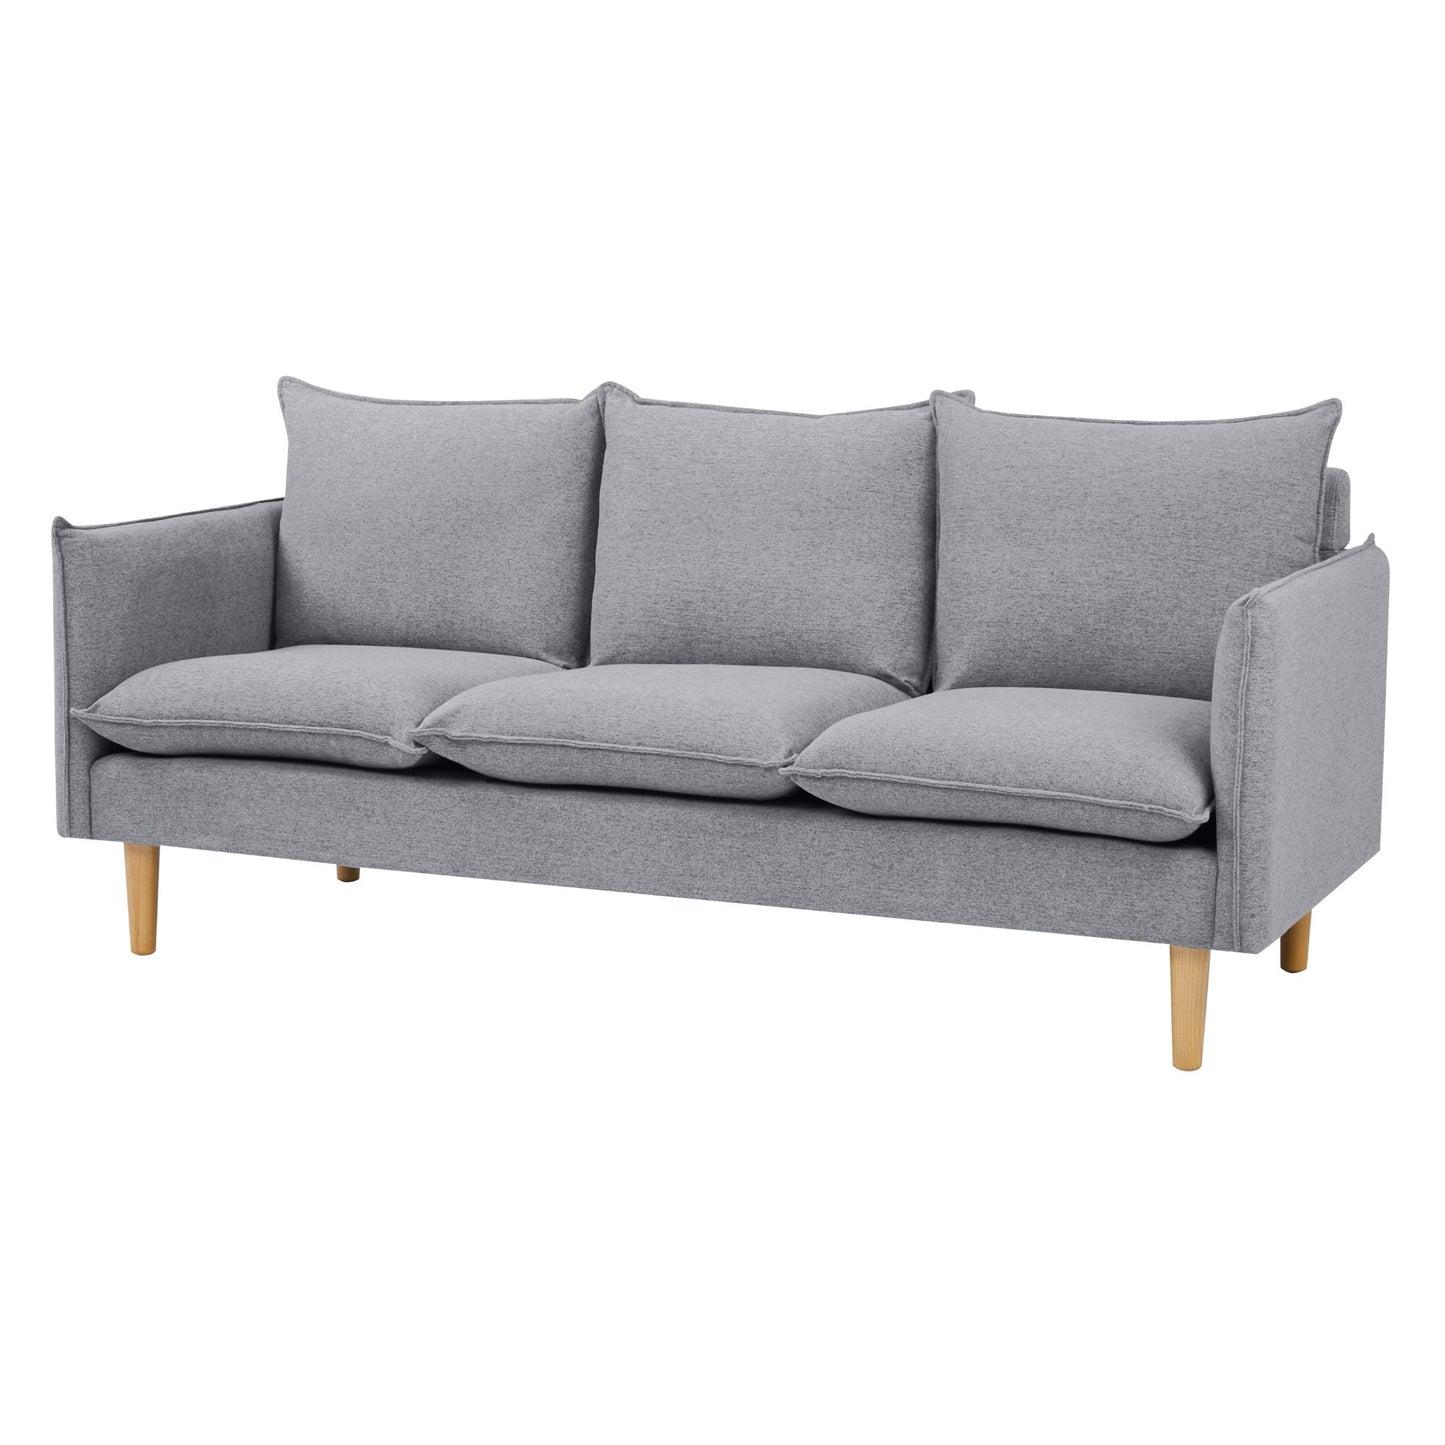 Sinatra 3 Seater Fabric Sofa Lounge Couch Grey